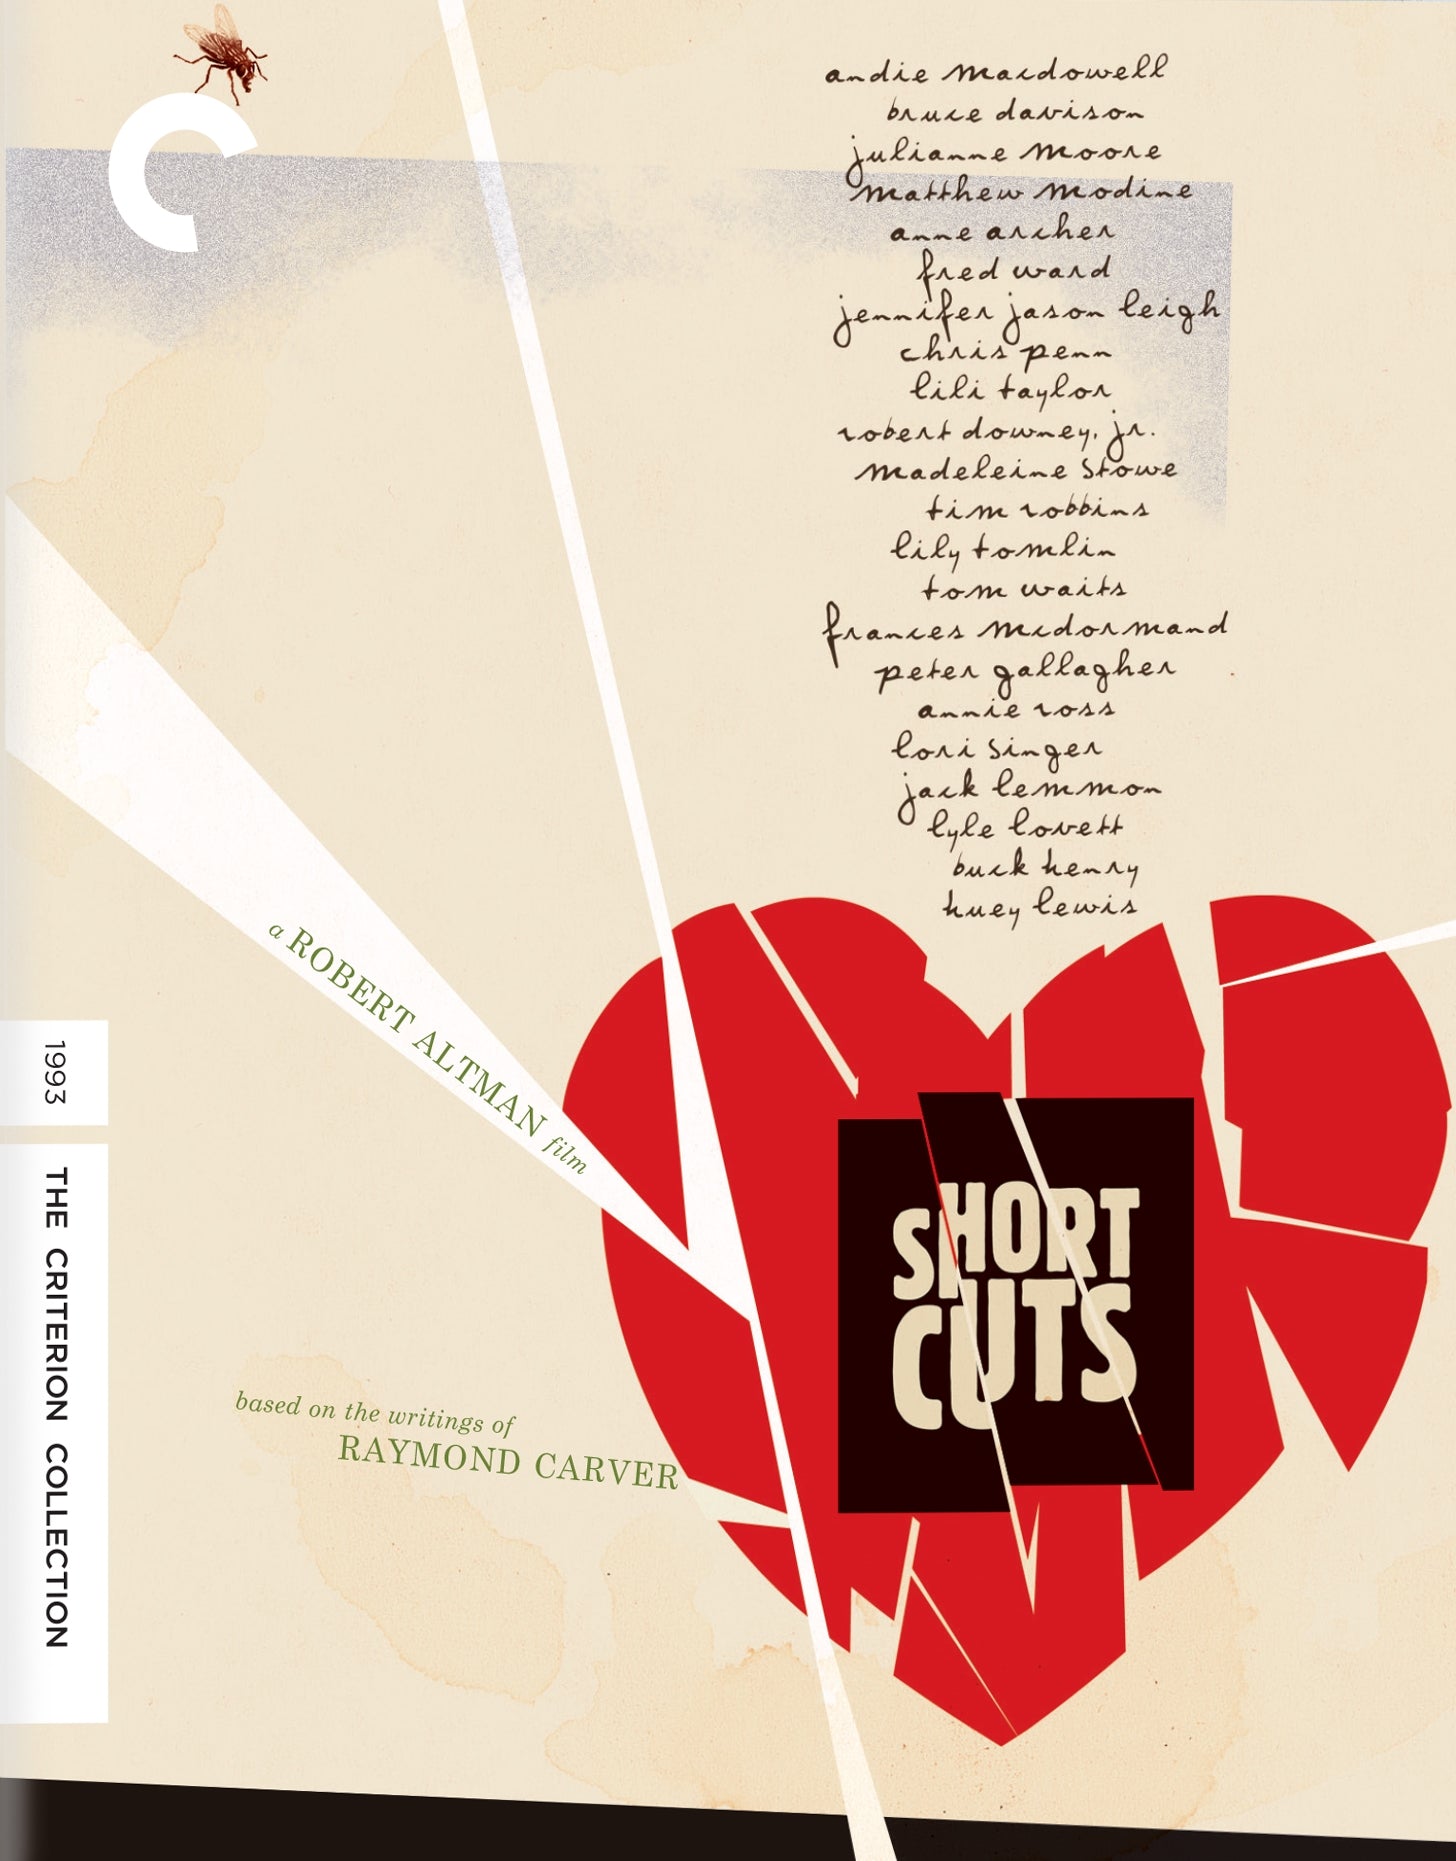 Short Cuts [Criterion Collection] [Blu-ray] [2 Discs] cover art